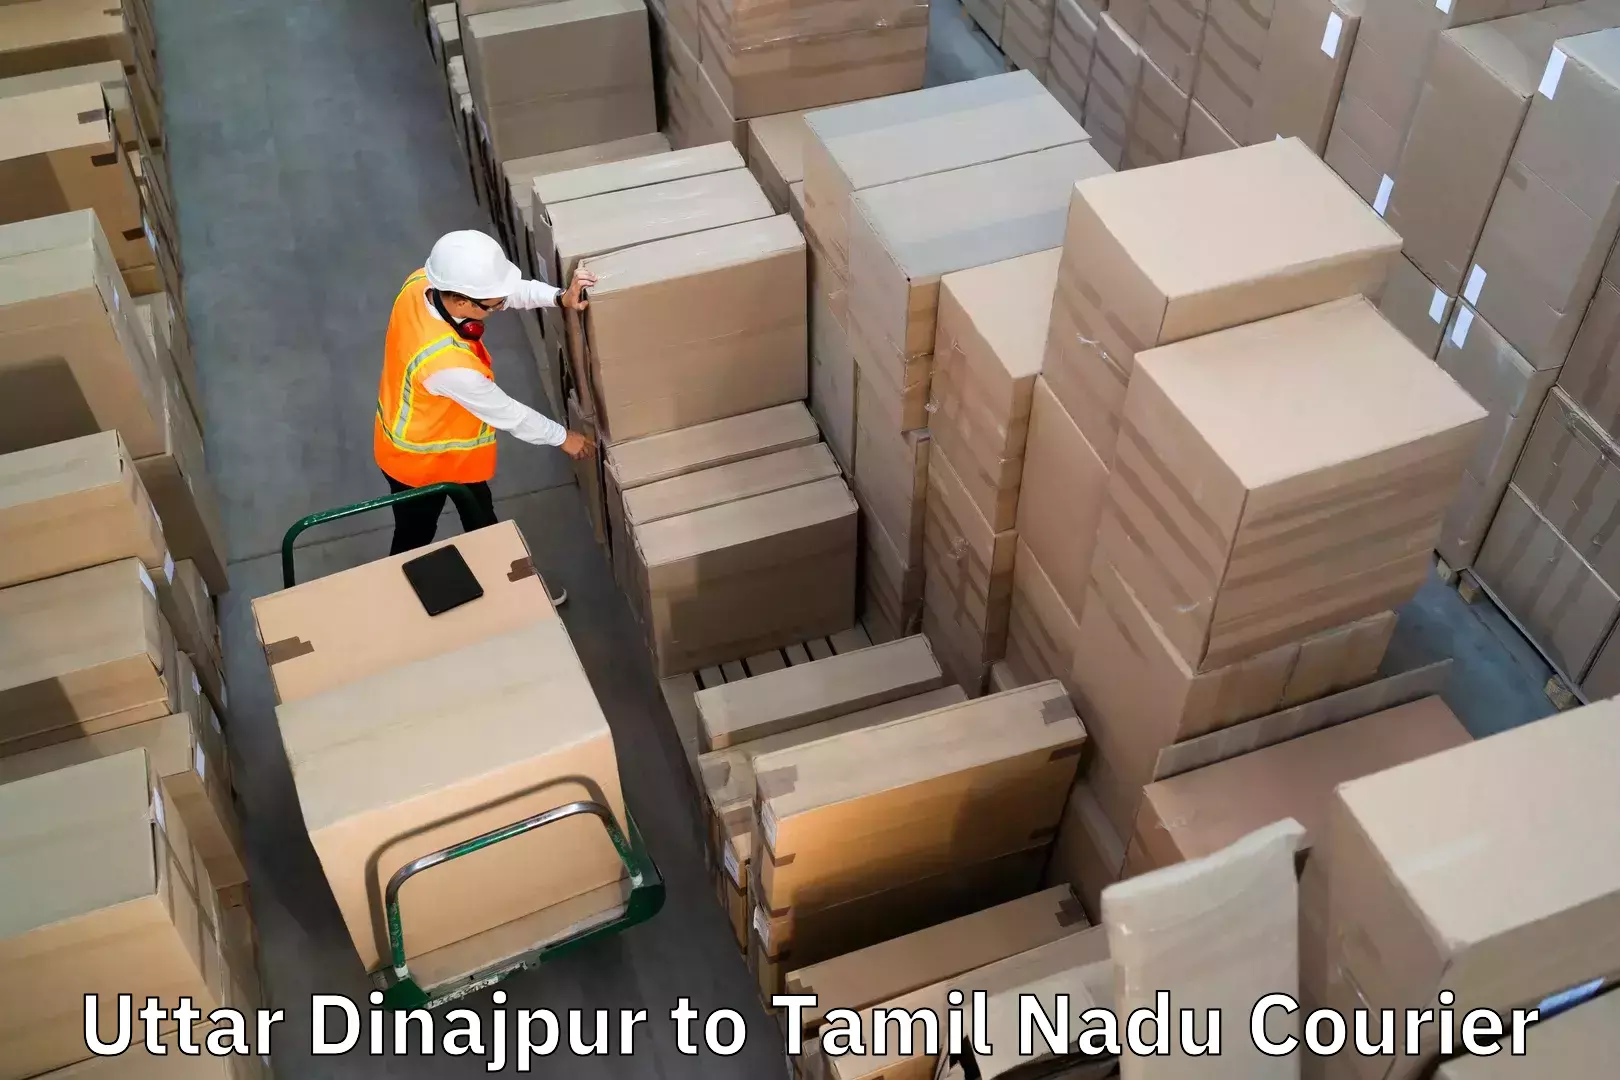 Reliable baggage delivery Uttar Dinajpur to Anna University Chennai